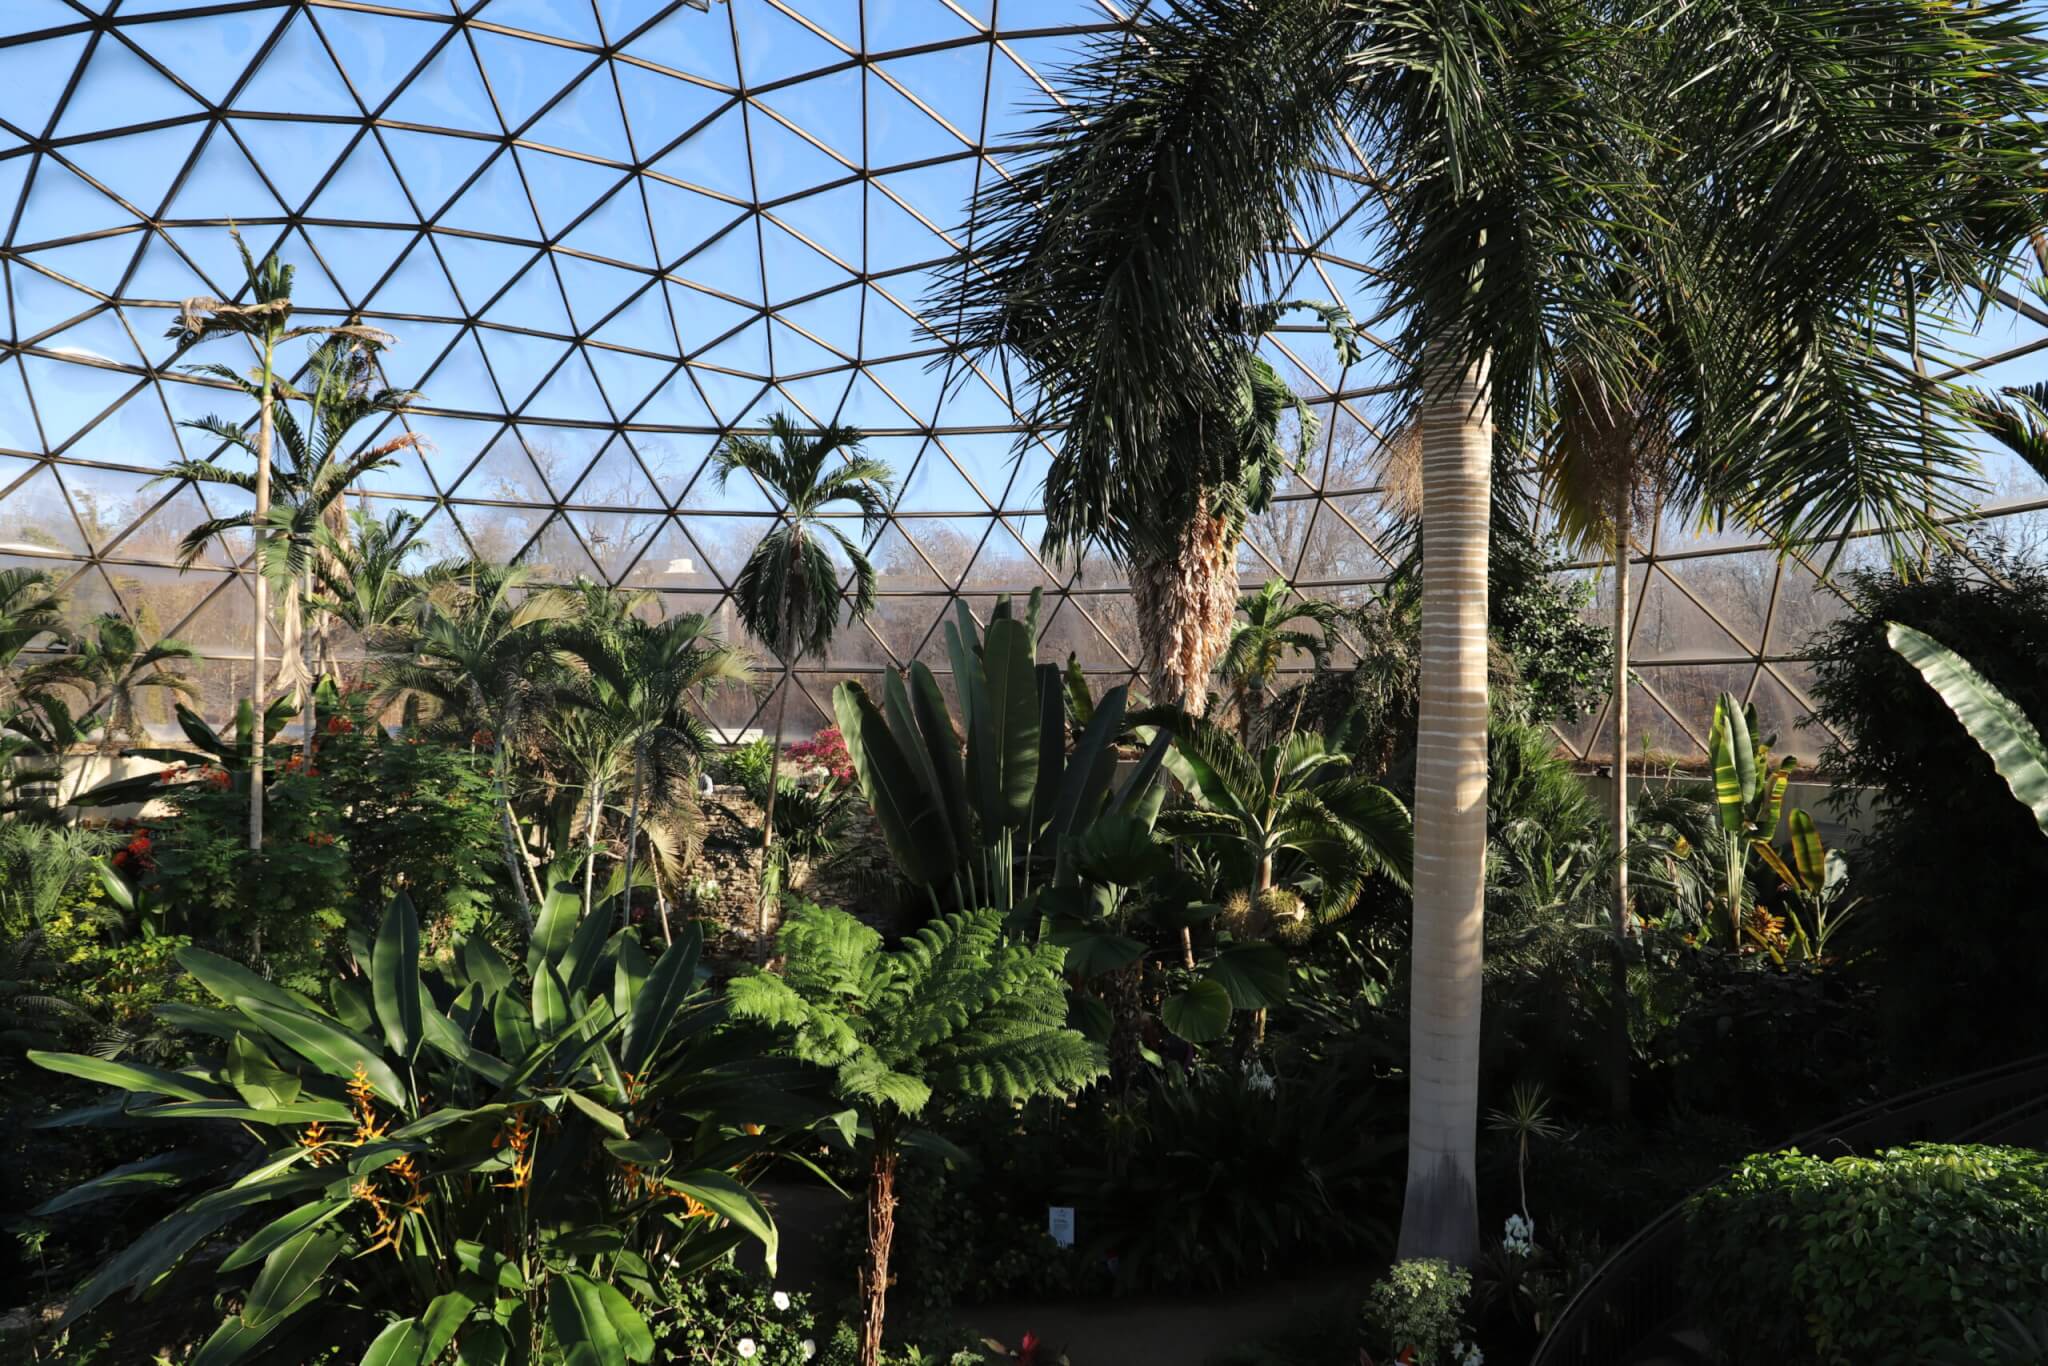 Photo of tropical plants in a geodesic dome.